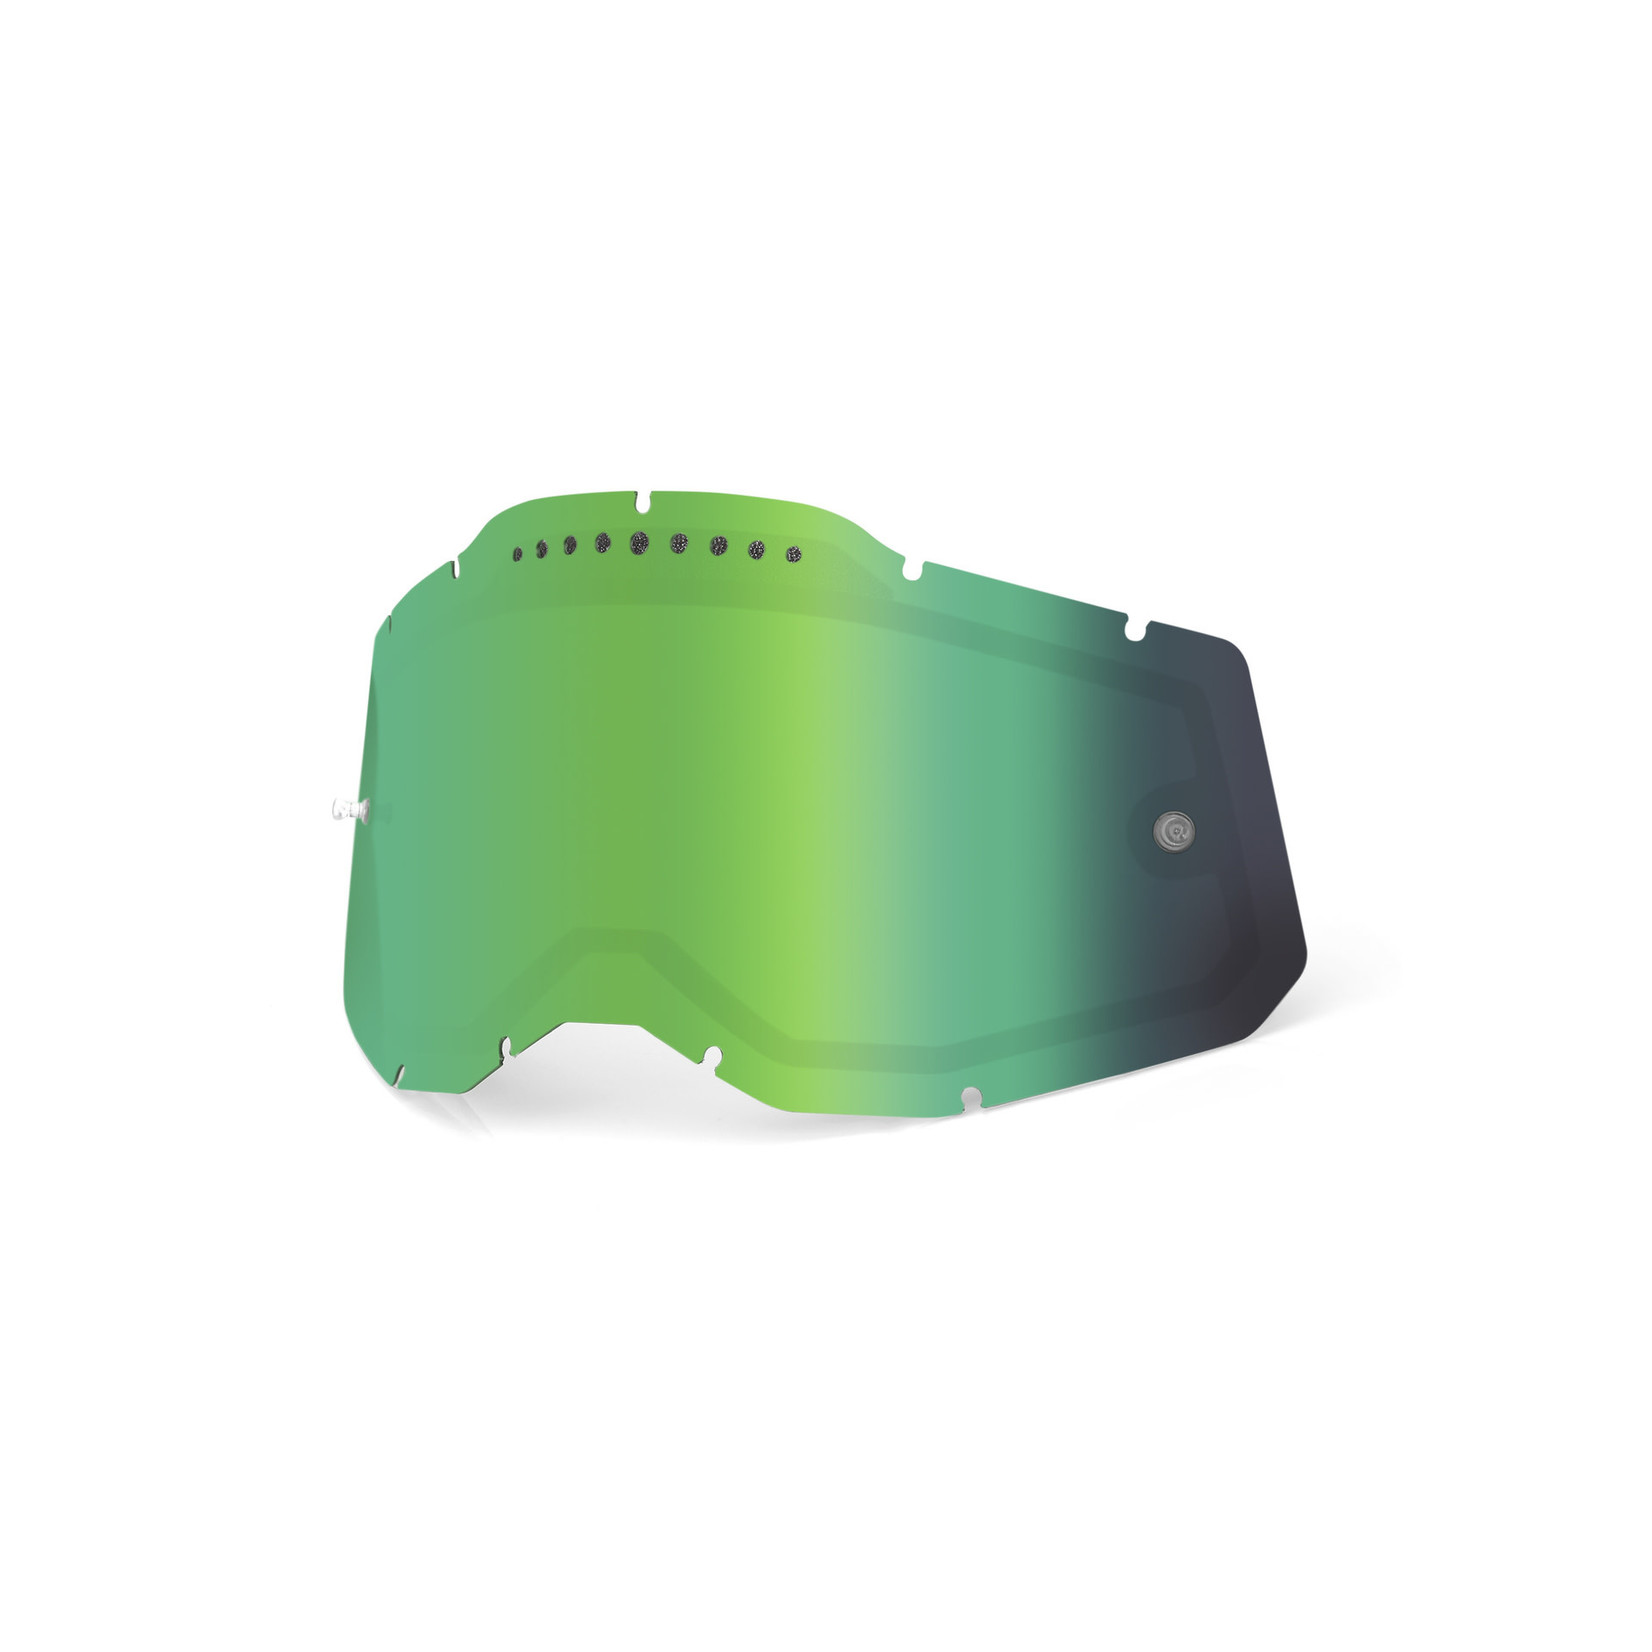 100 Percent 100% RC2/AC2/ST2 Bike/Cycling Goggle Replacement Lens - V Dual Mirror Green